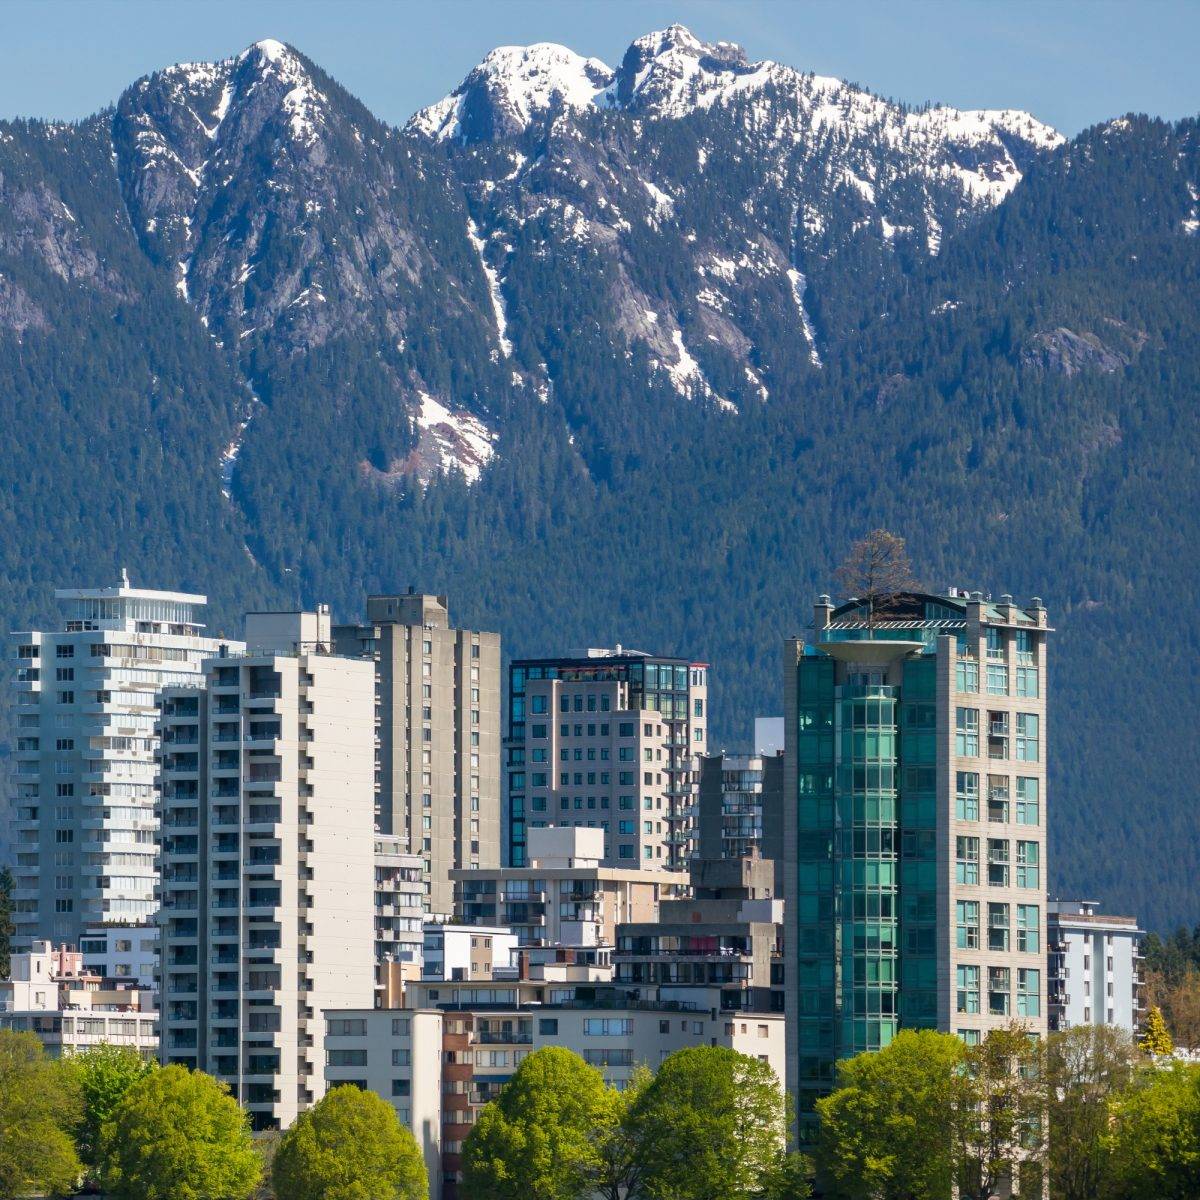 High rise residential building with mountain view in Vancouver during winter